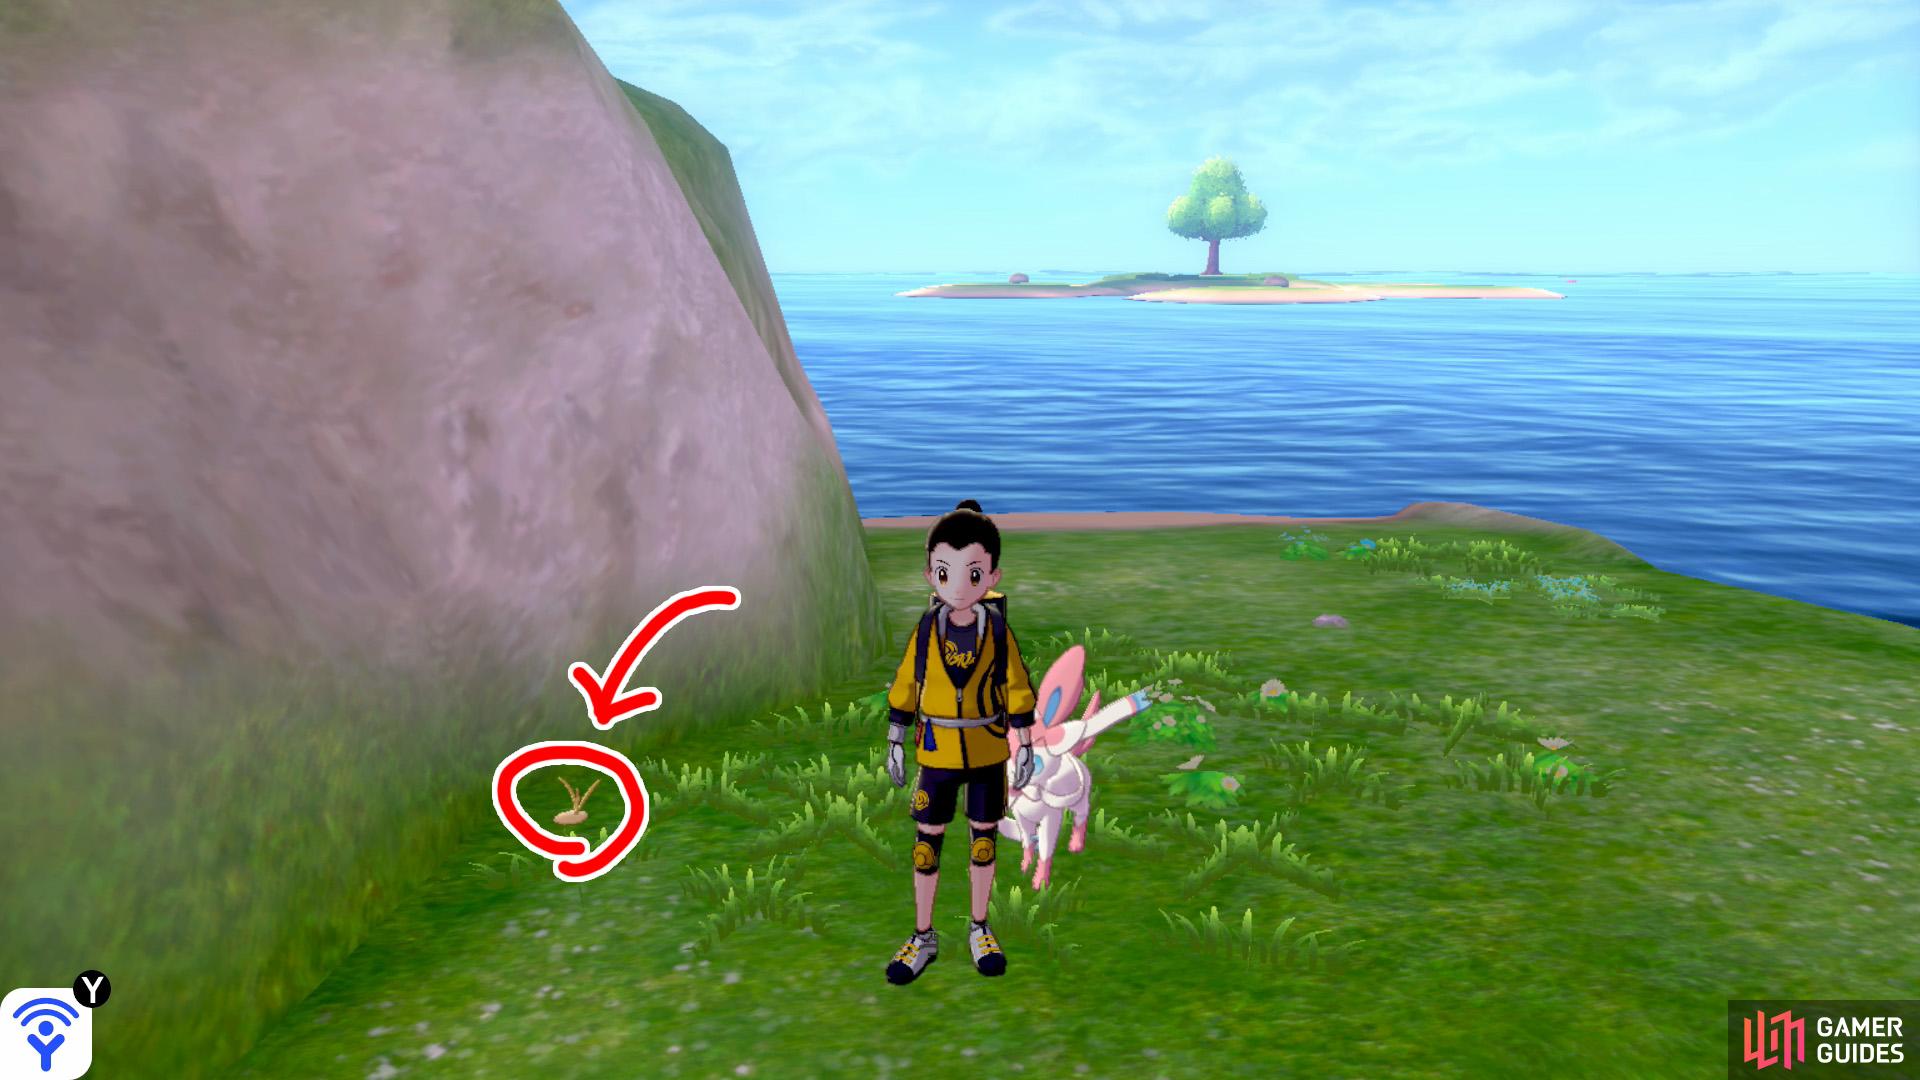 1/3: Start from the Tower of Waters in Challenge Beach. With your back to the entrance, turn left and swim into the water. Go straight ahead, while keeping close to the mainland on the right. When you're parallel to Honeycalm Island, there's a secluded shore. It's burrowed to the right of the Pokémon Den here.